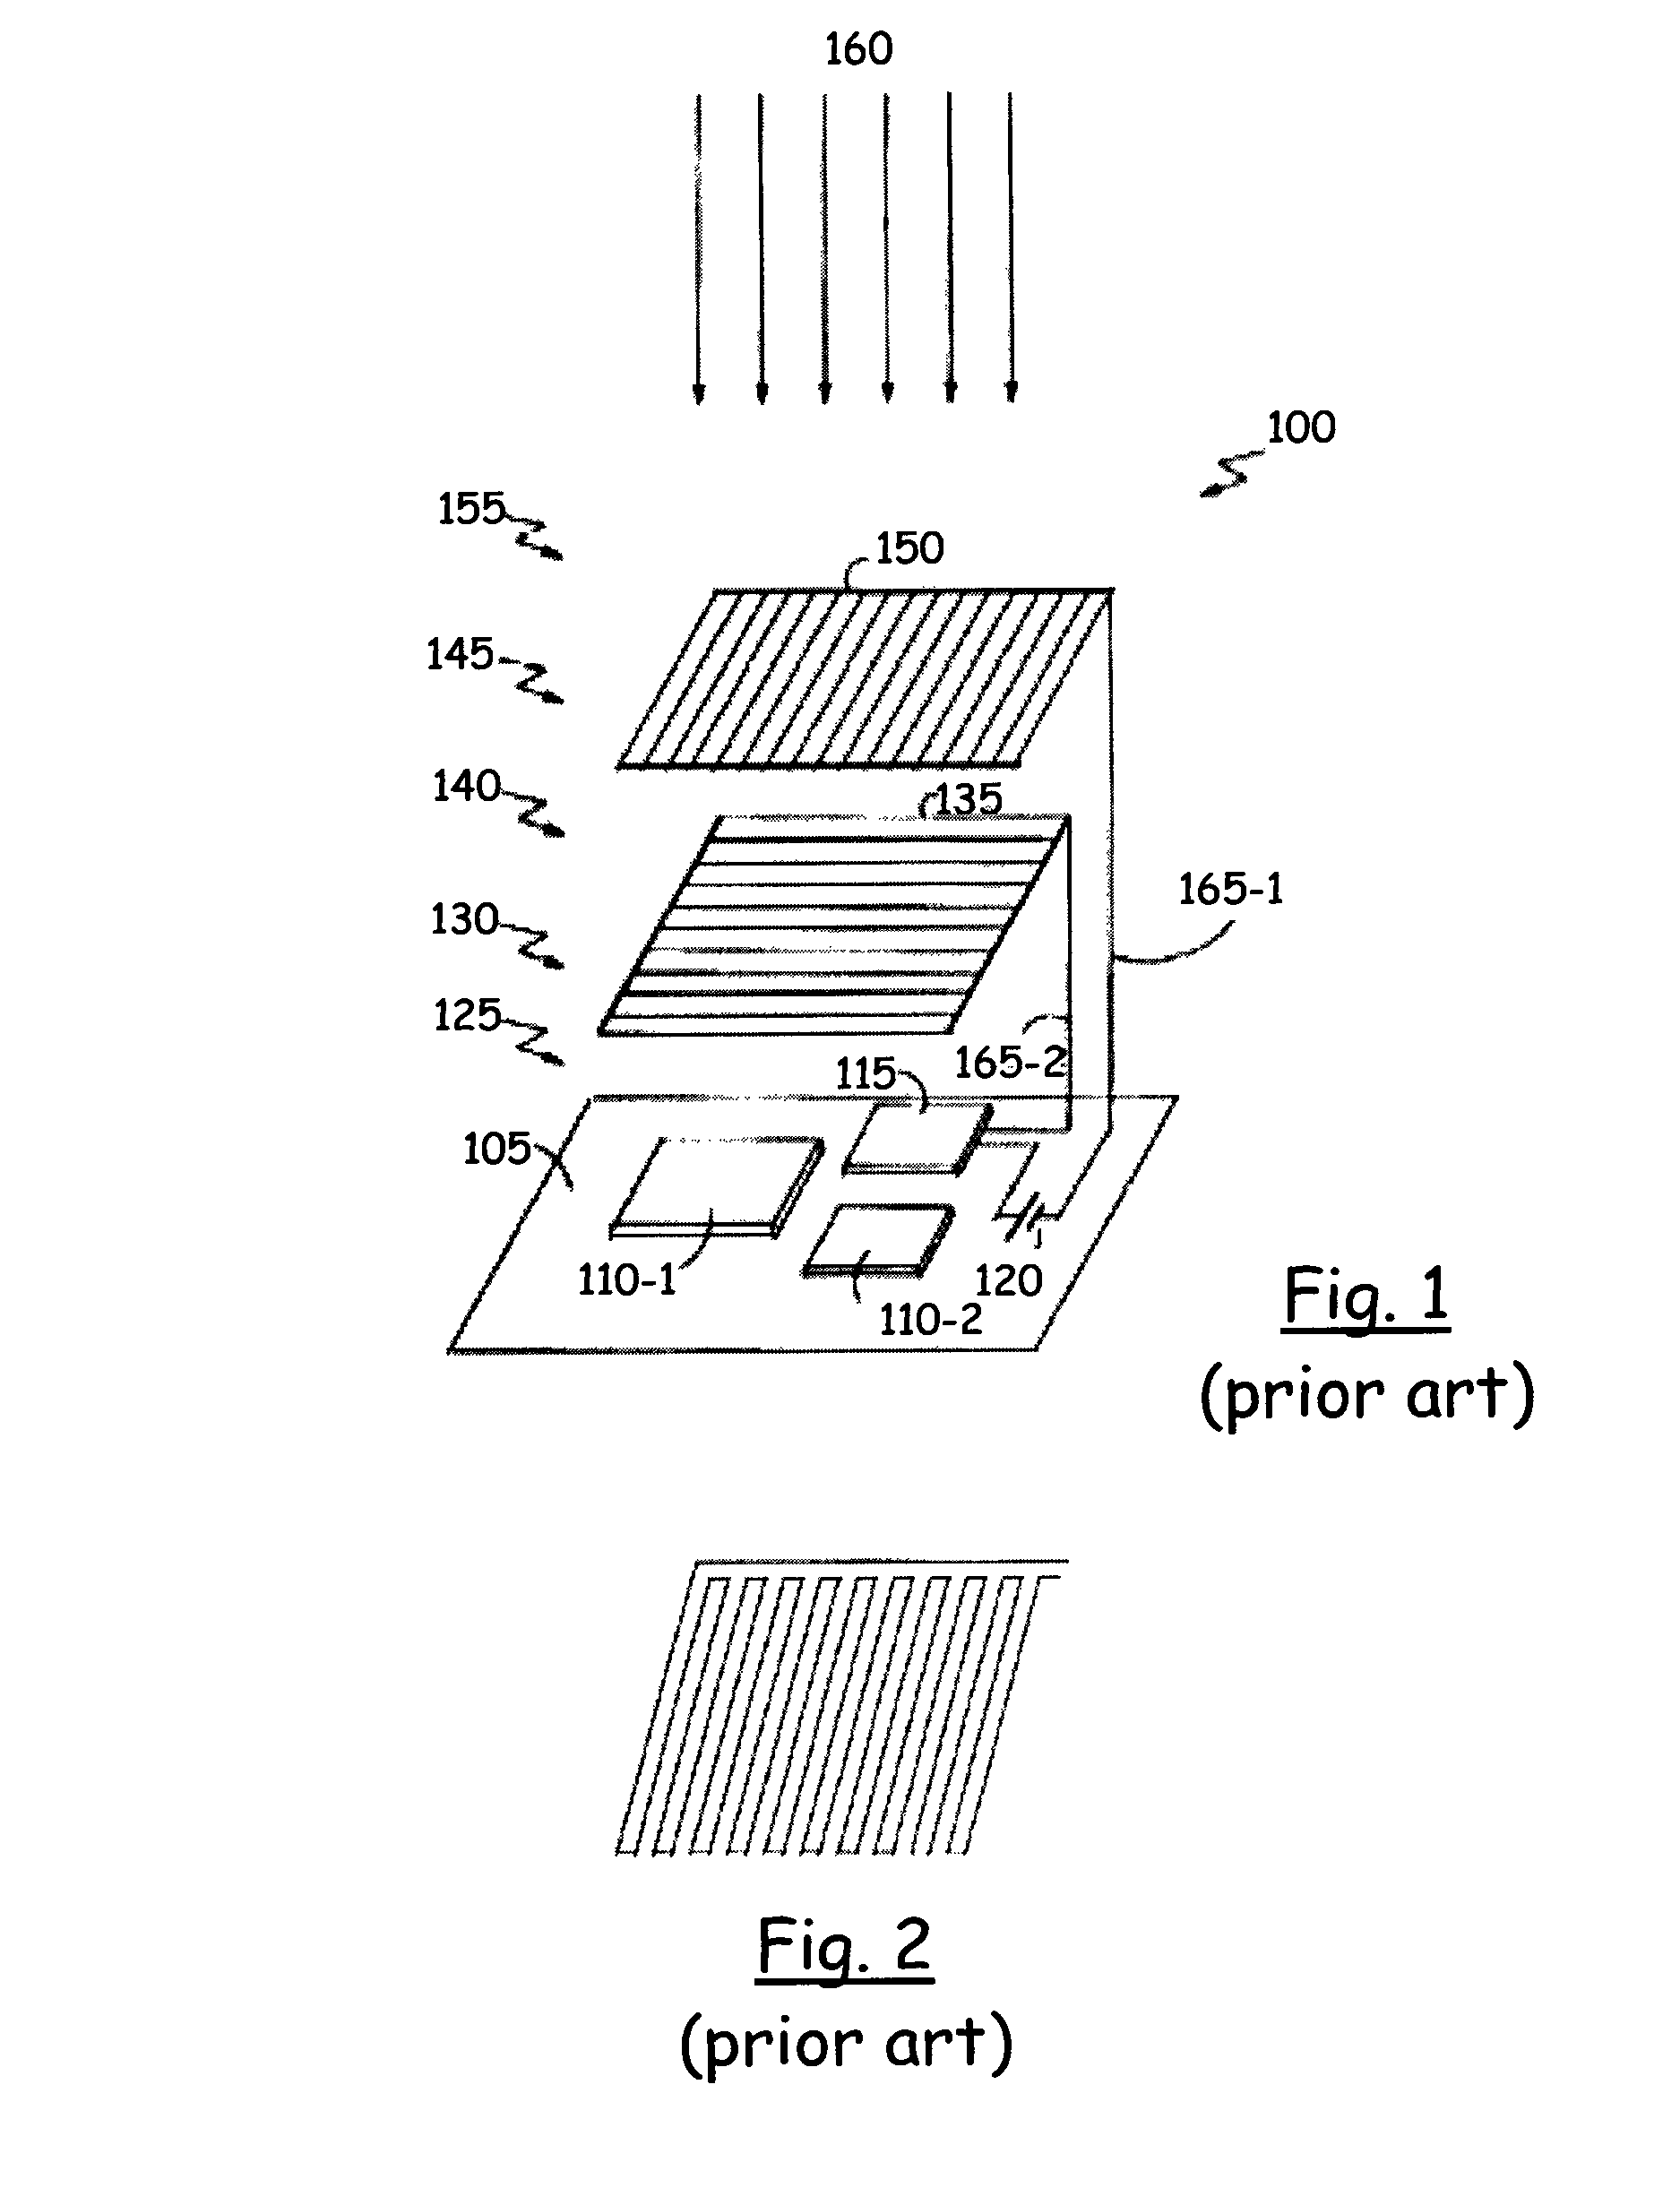 Tamper-proof structures for protecting electronic modules